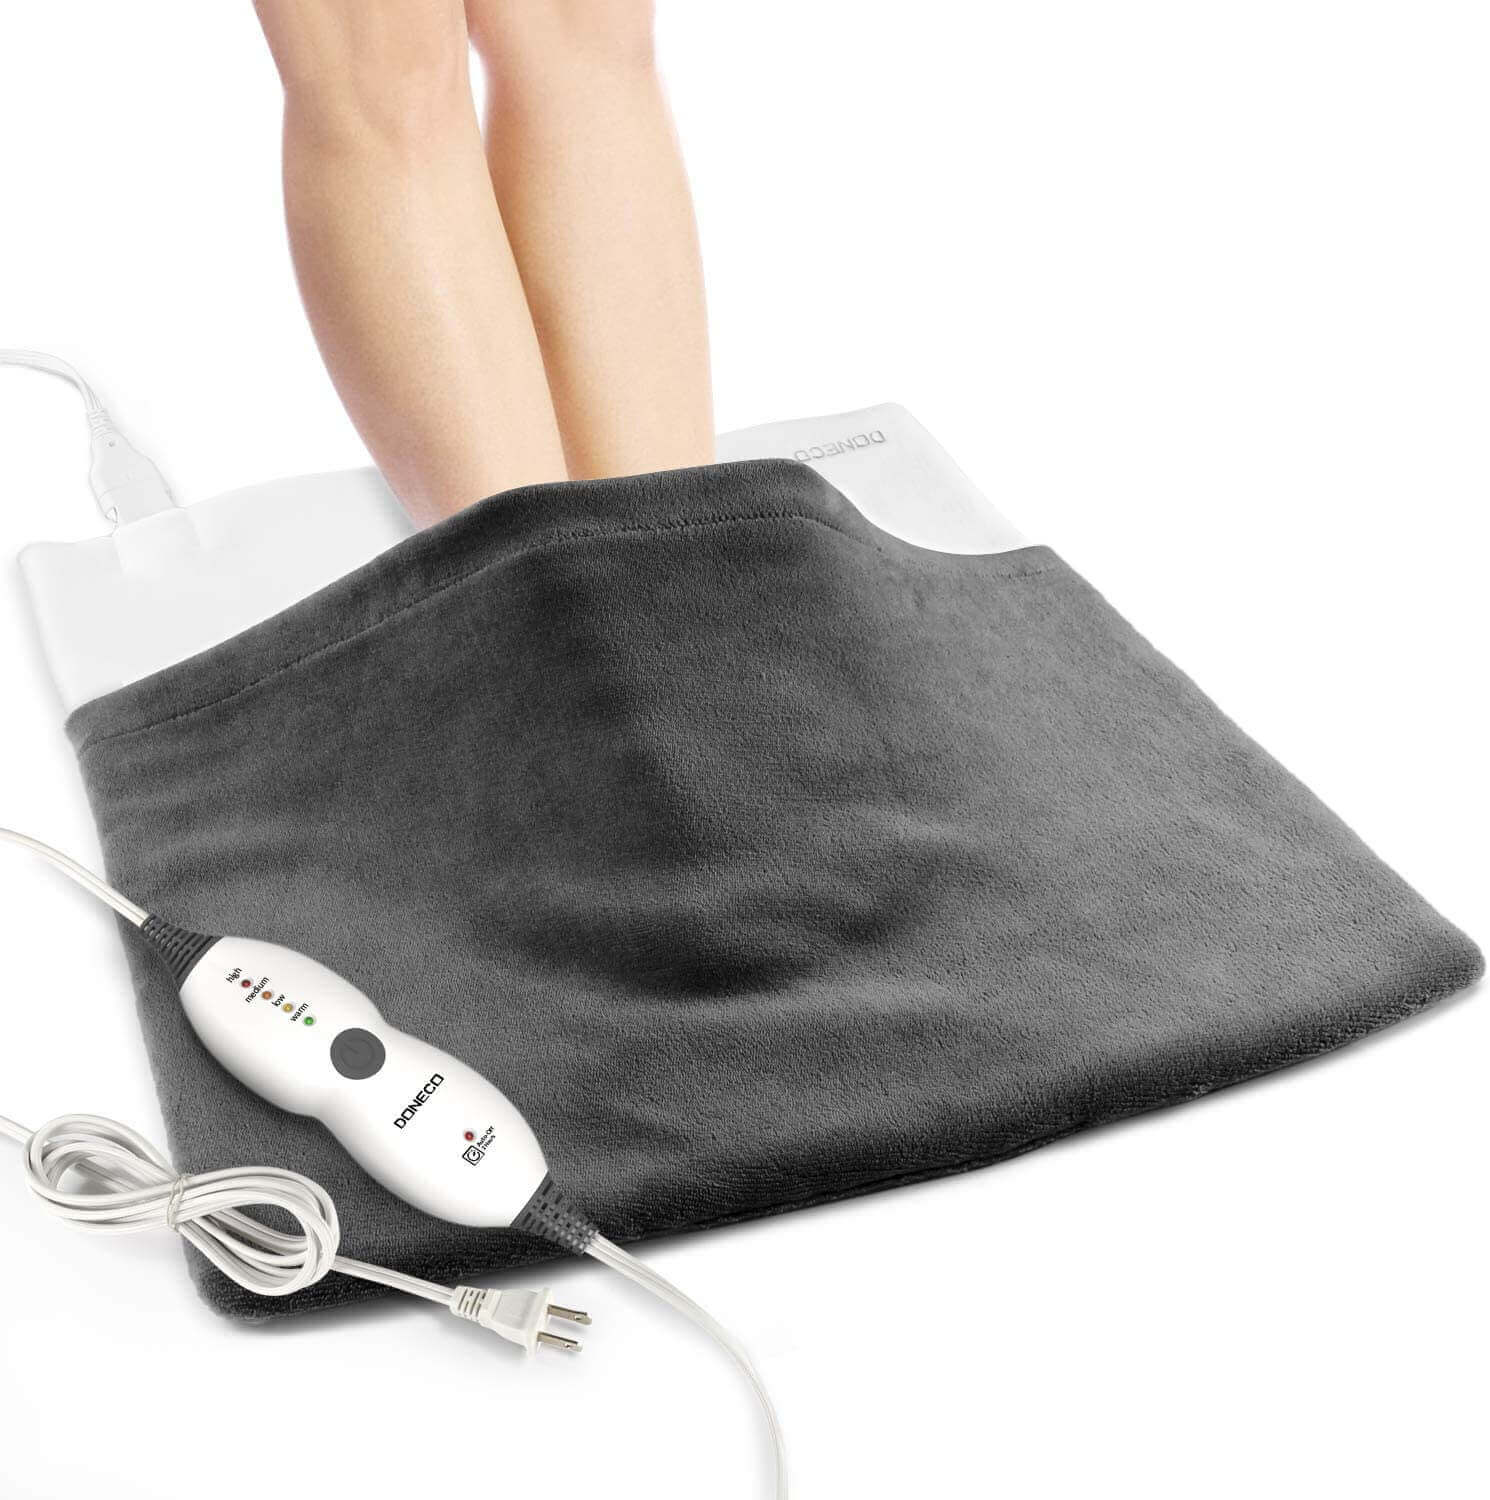 DONECO King Size Heating Pad (22 x 22 in), Electric Foot Warmer with 4 Temperature Settings and Fast-Heating Technology